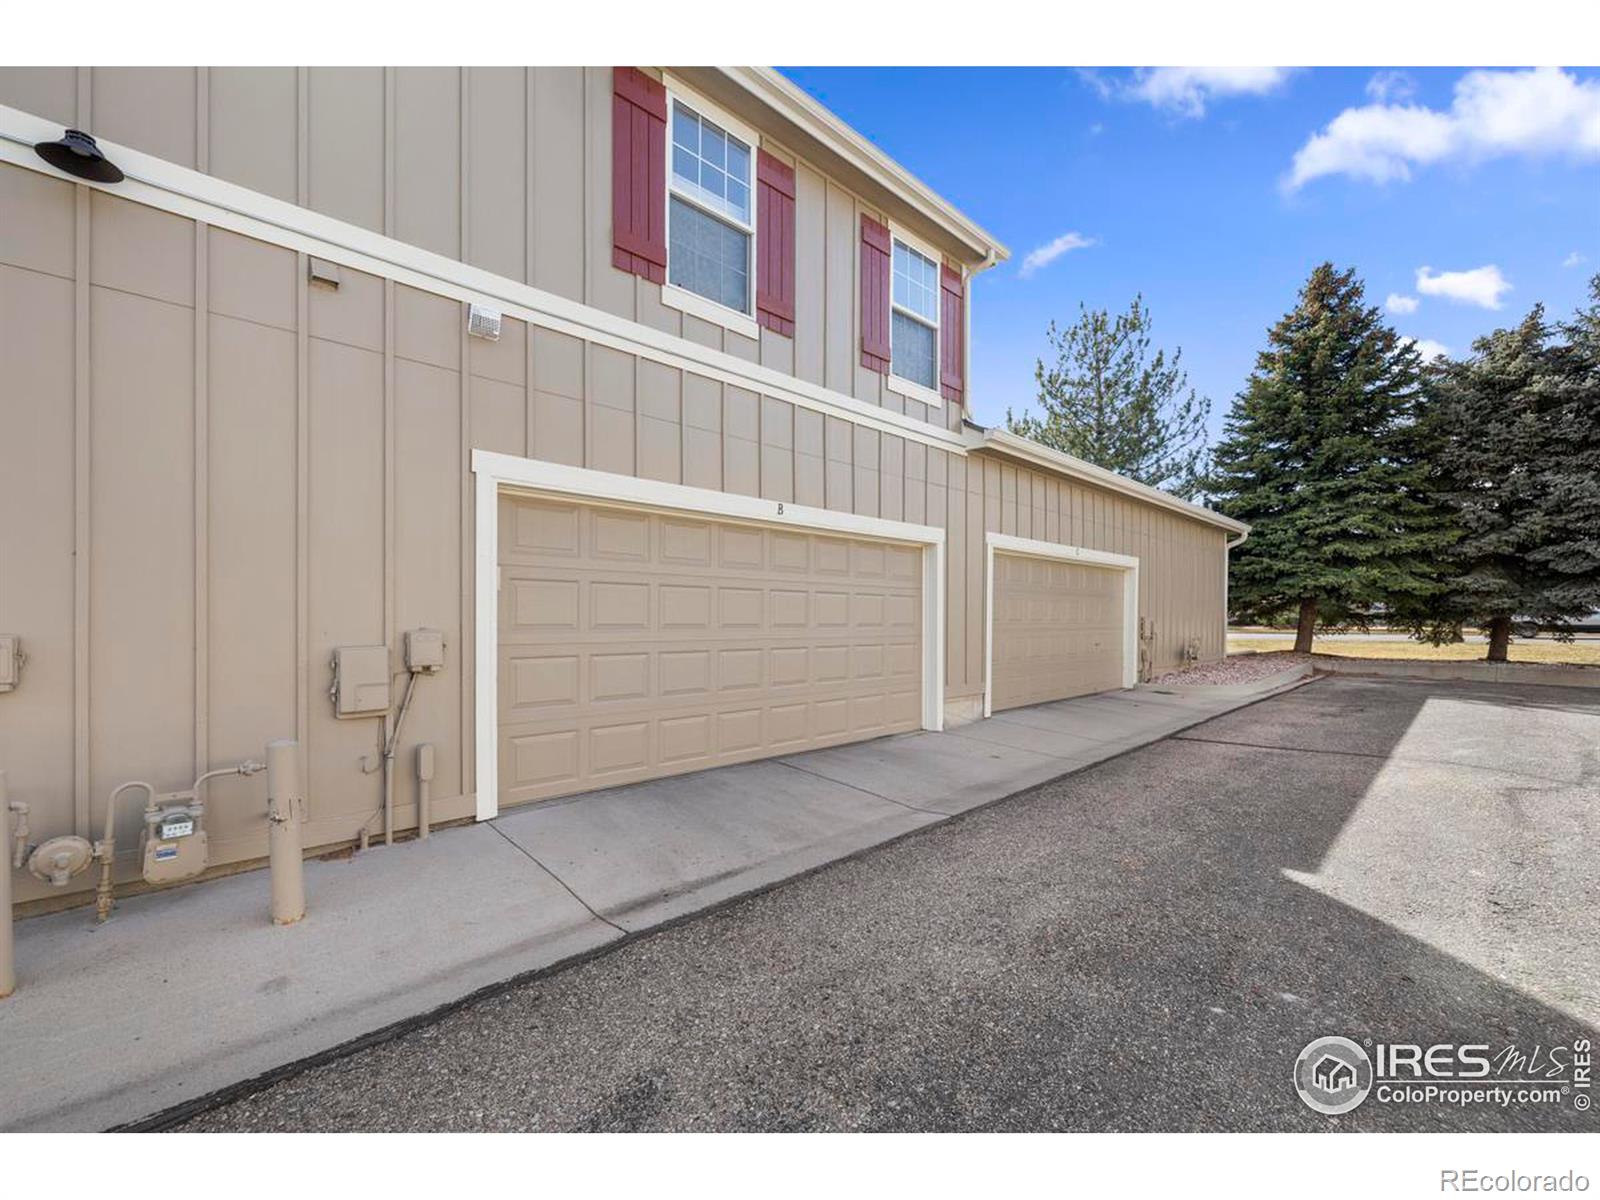 Report Image for 5121  Stillwater Creek Drive,Fort Collins, Colorado